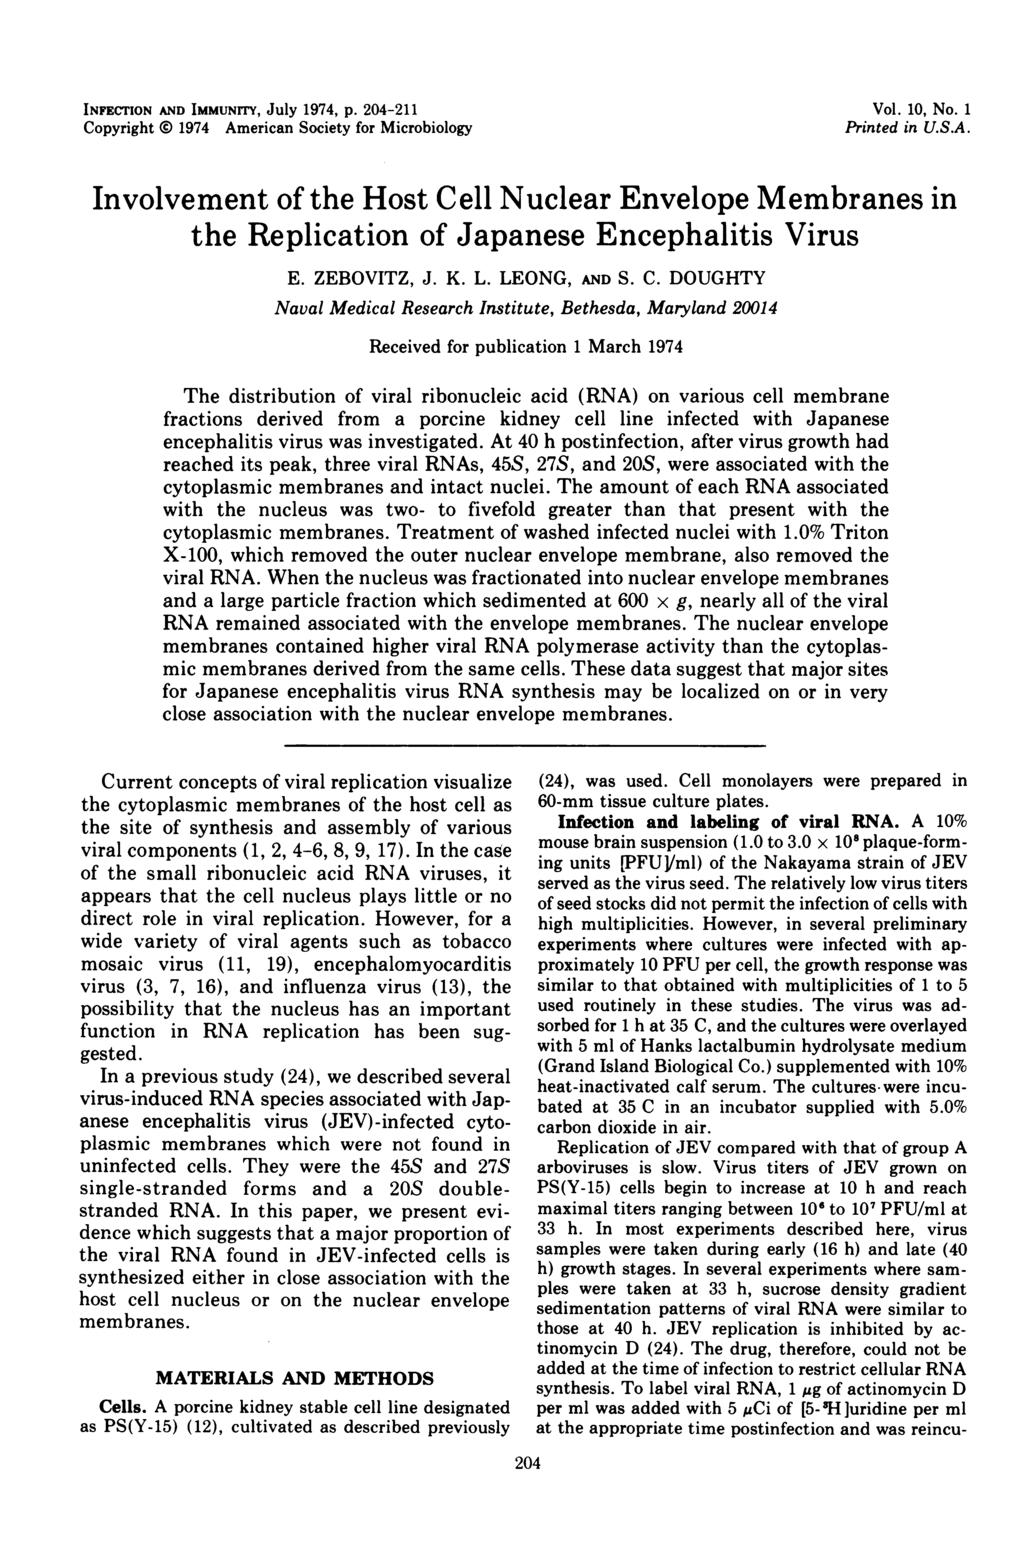 INFECriON AND IMMUNrrY, July 1974, p. 204-211 Copyright i 1974 American Society for Microbiology Vol. 10, No. 1 Printed in U.S.A. Involvement of the Host Cell Nuclear Envelope Membranes in the Replication of Japanese Encephalitis Virus E.